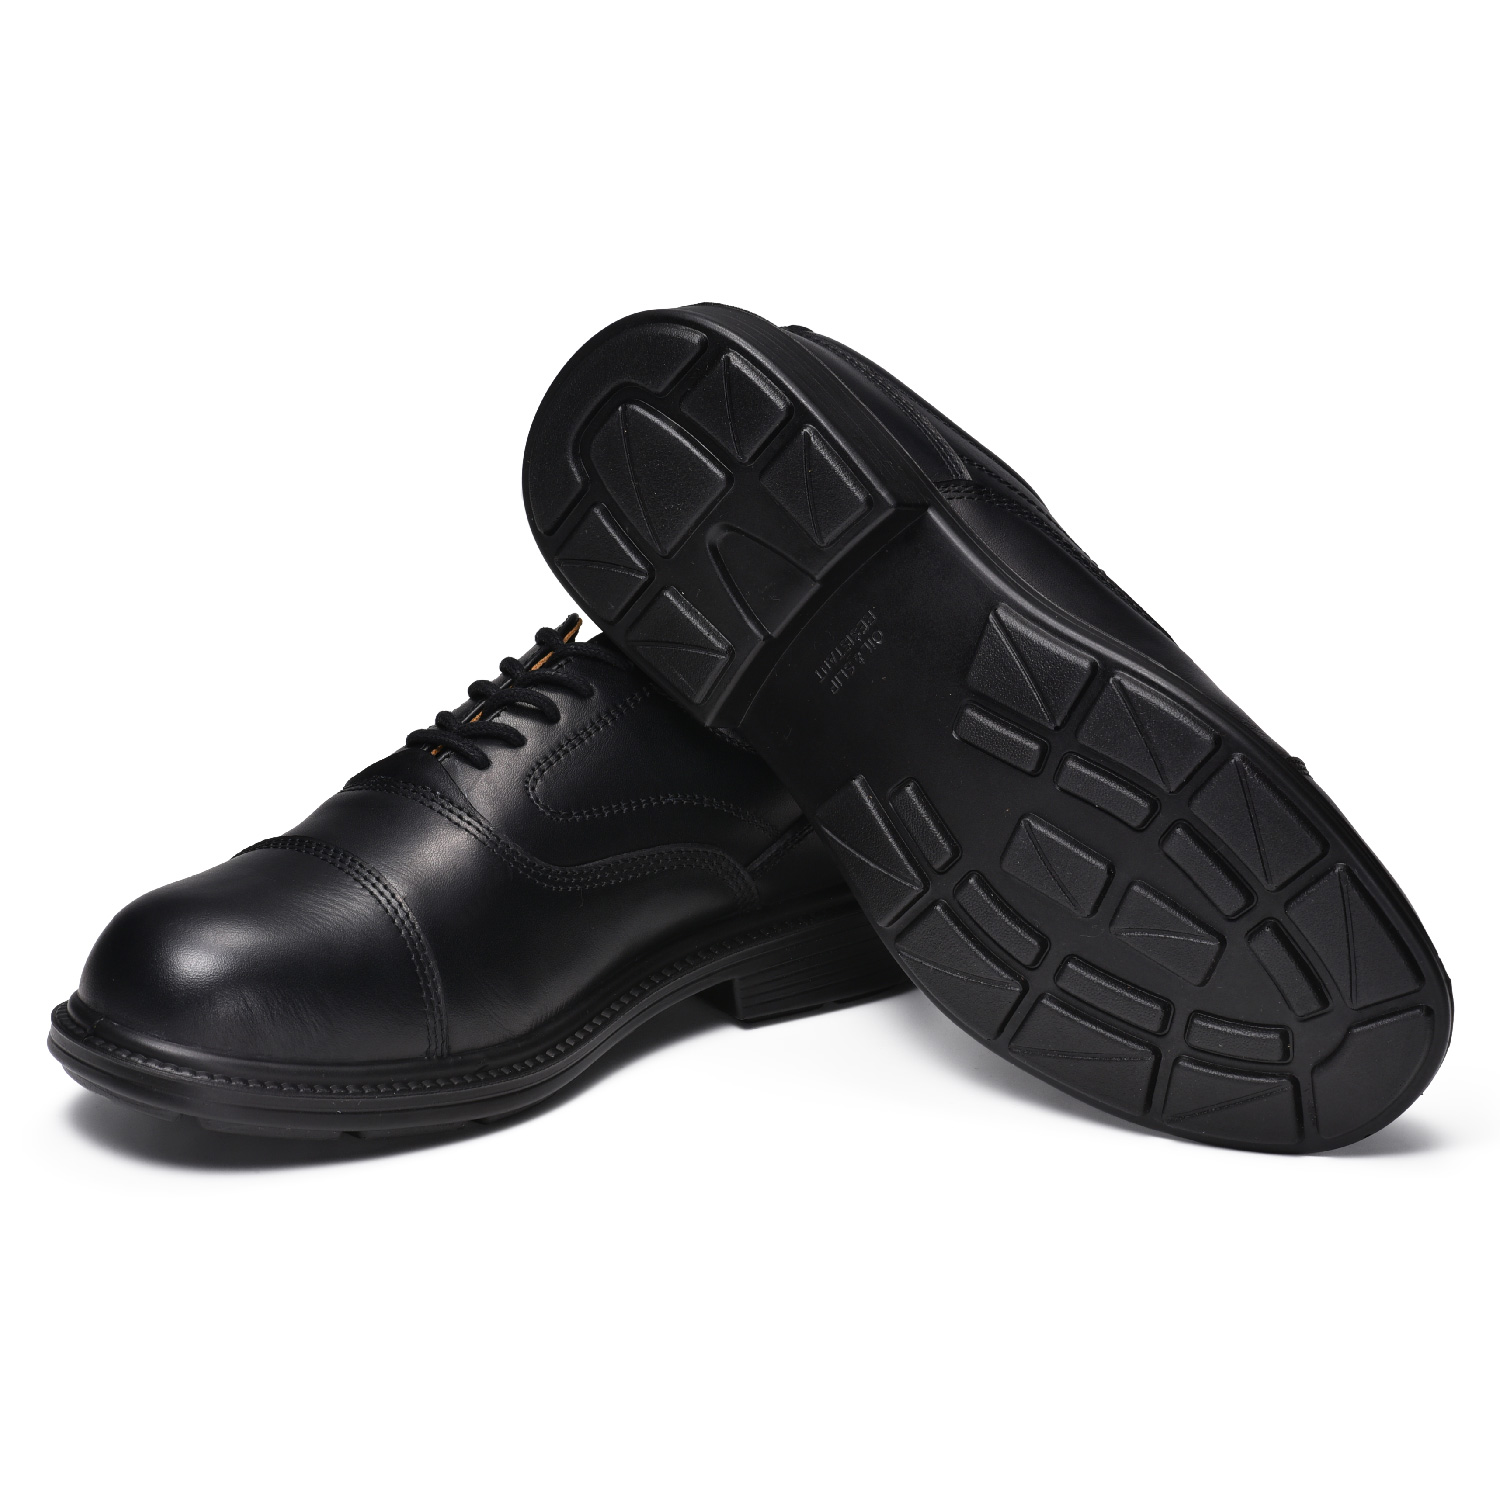 S3 Leather Safety Shoes for Executive & Manager with Steel Toe L-7527